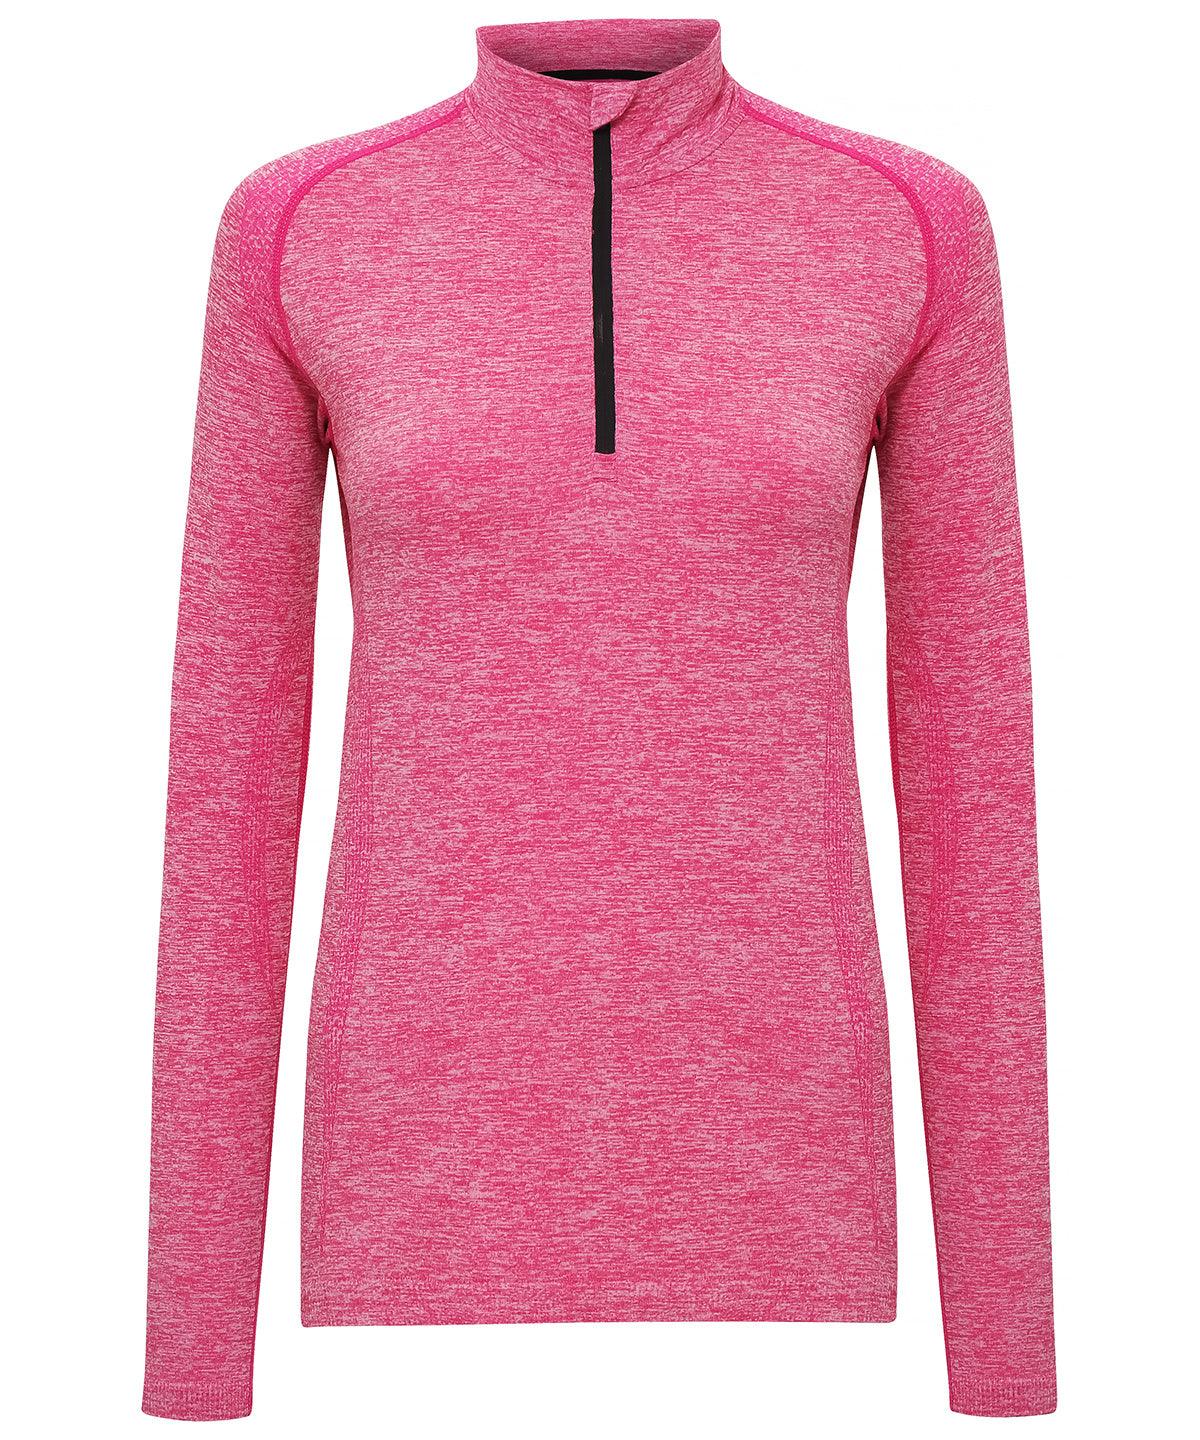 Pink - Women's TriDri® seamless '3D fit' multi-sport performance zip top Sports Overtops TriDri® Activewear & Performance, Exclusives, Must Haves, Outdoor Sports, Raladeal - Recently Added, Sports & Leisure, Team Sportswear Schoolwear Centres